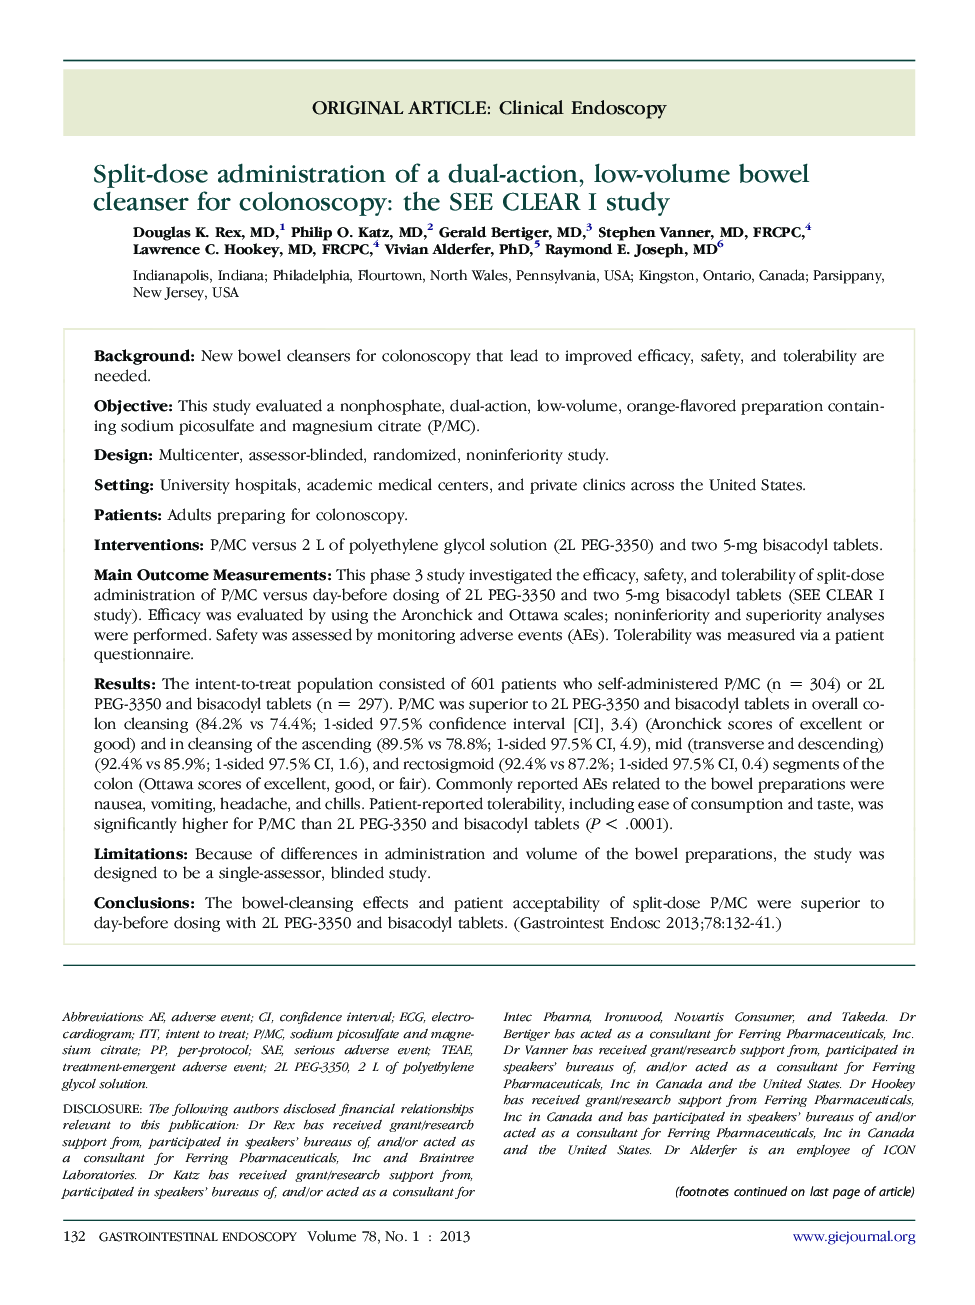 Split-dose administration of a dual-action, low-volume bowel cleanser for colonoscopy: the SEE CLEAR I study 